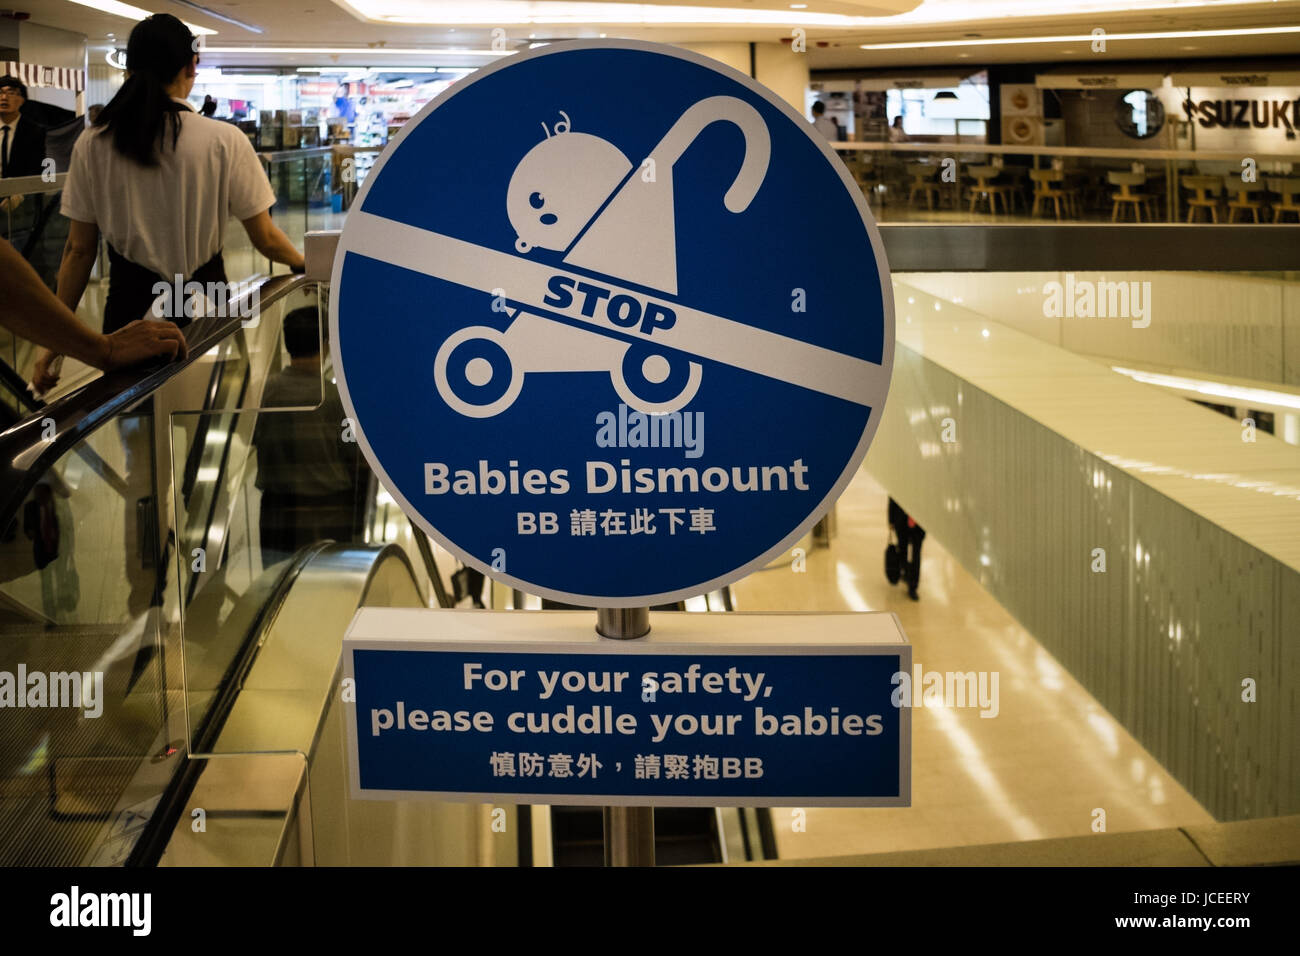 Sign in front of escalator promoting safety of babies in strollers Stock Photo